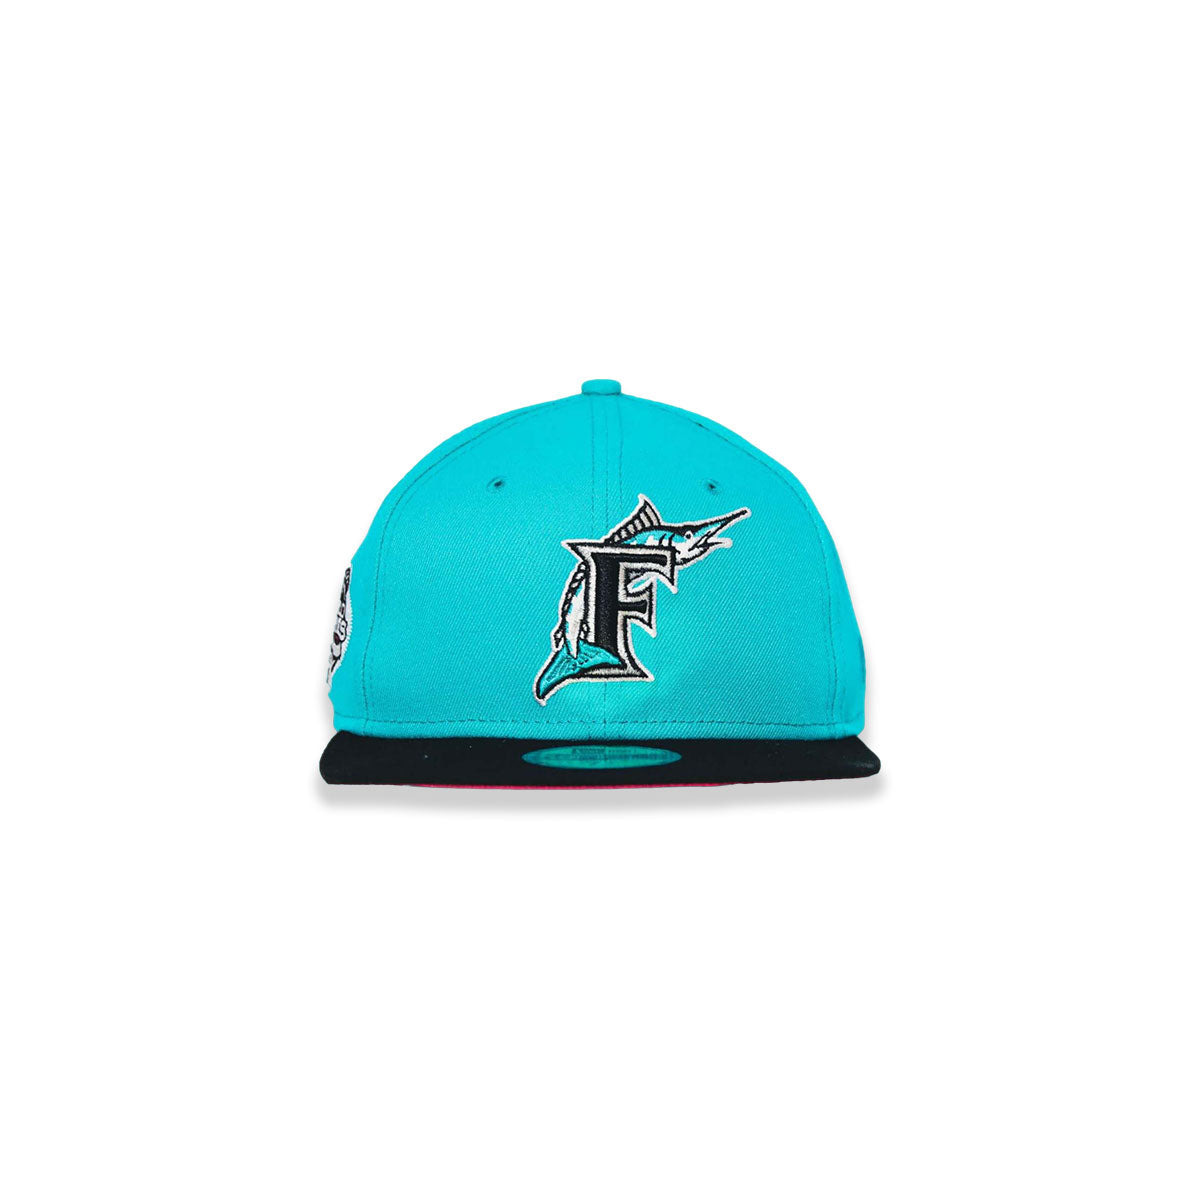 New Era Florida Marlins World Series 2003 Patch 59FIFTY Fitted Hat